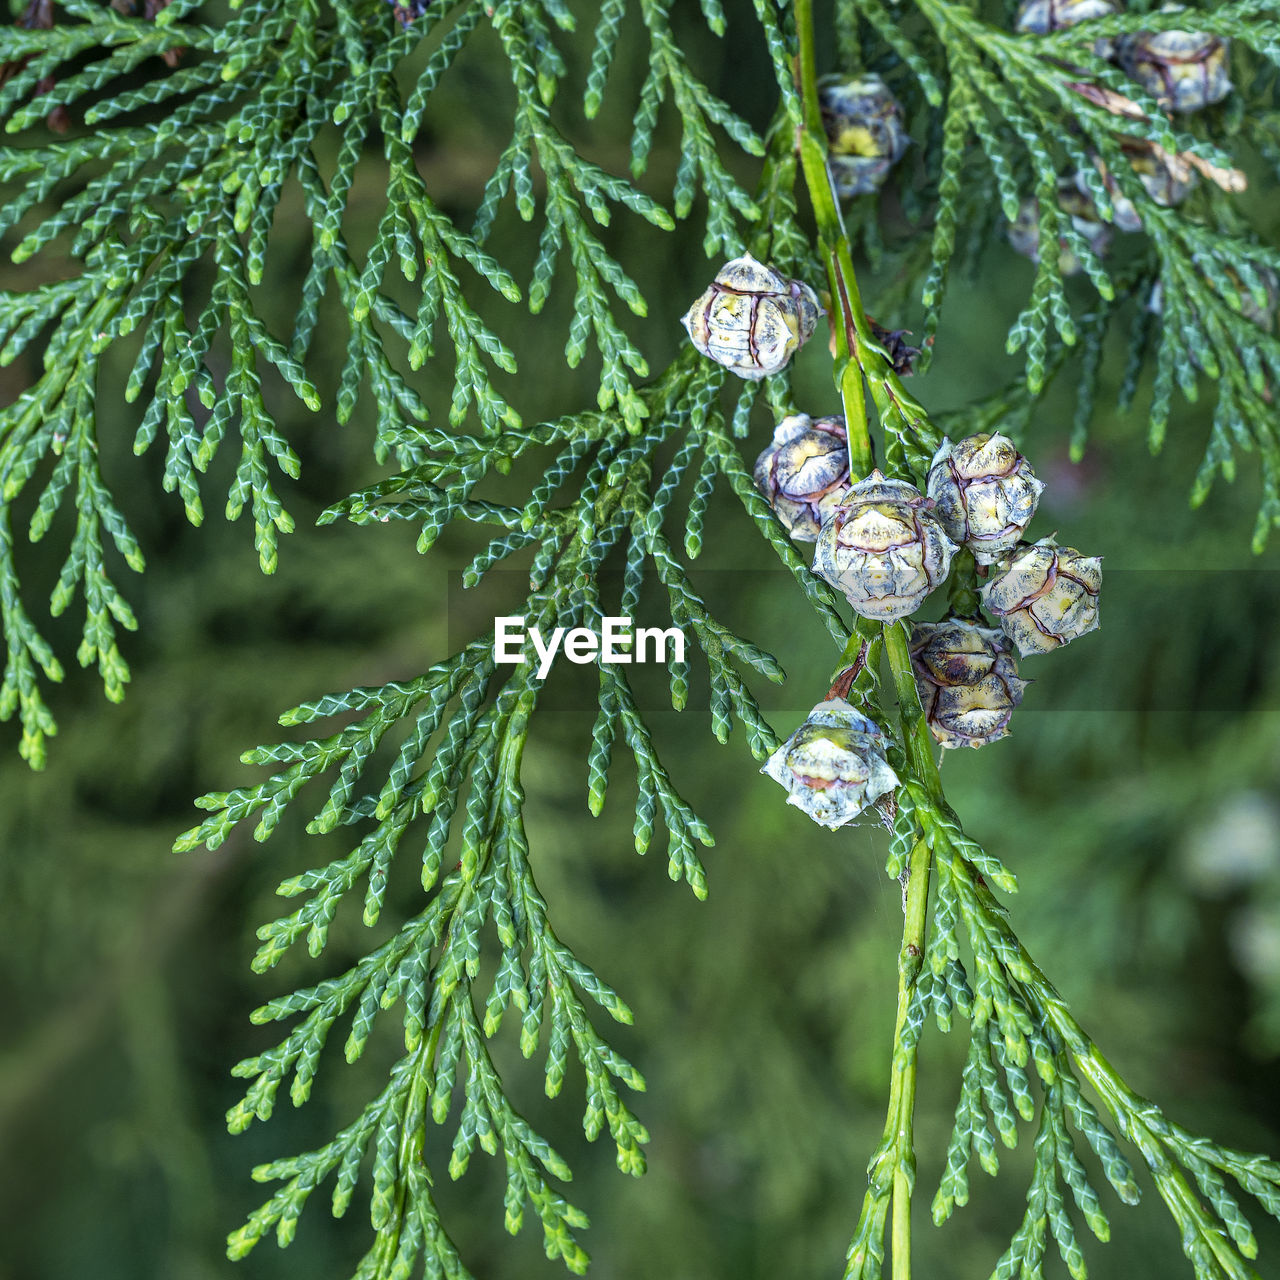 Closeup of the green leaves and tiny cones of a lawson cypress tree chamaecyparis lawsoniana